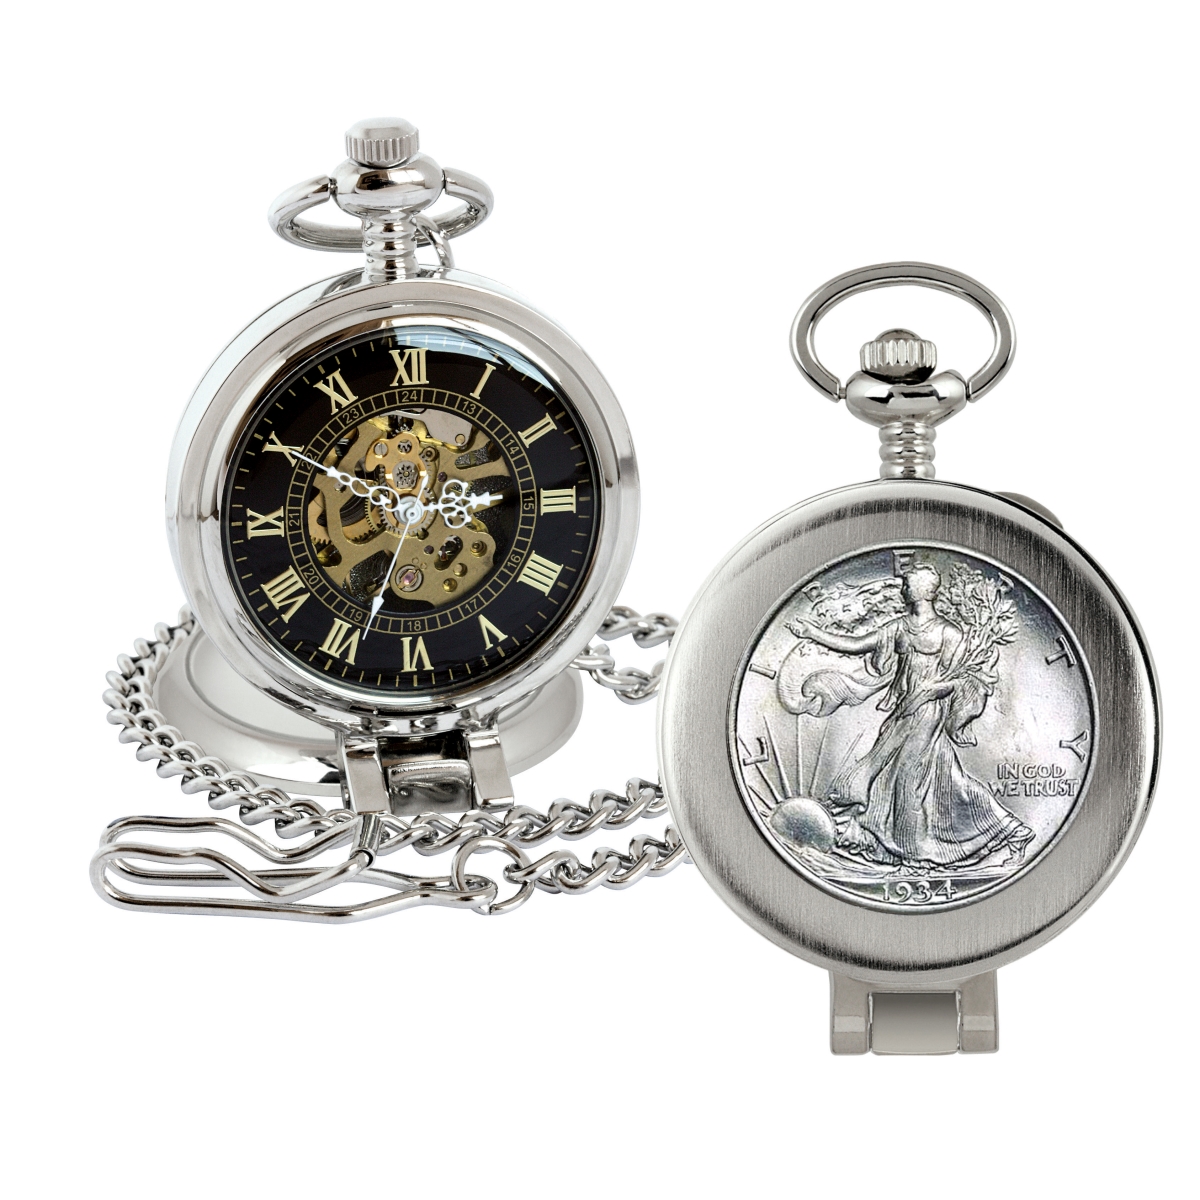 Picture of American Coin Treasures 16271 Silver Walking Liberty Half Dollar Coin Pocket Watch with Skeleton Movement, Black Dial with Gold Roman Numerals - Magnifying Glass